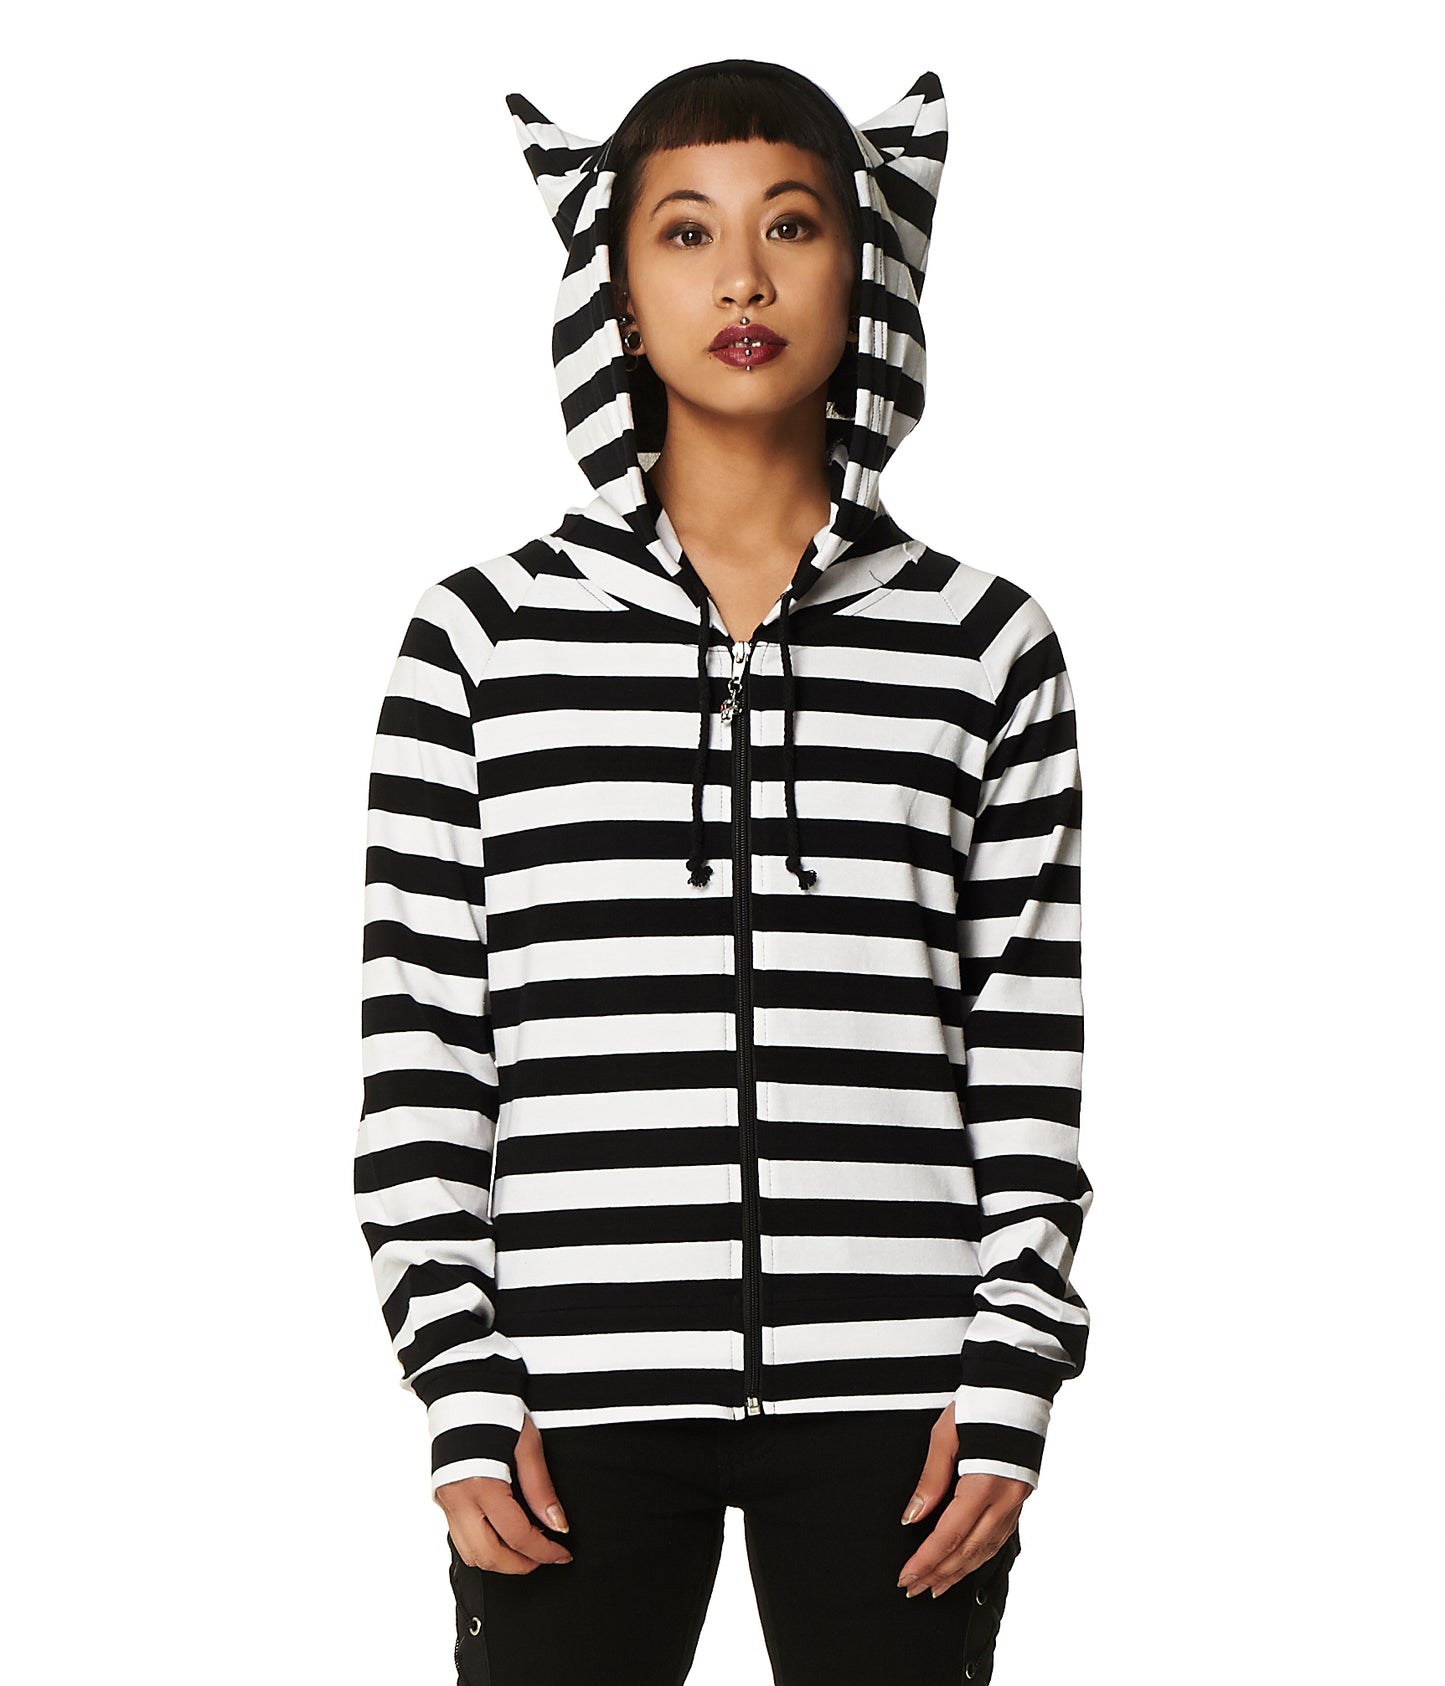 Model wearing a black and white  stripes zip up hoodie with cat ears on the hood and thumb holes in the sleeves